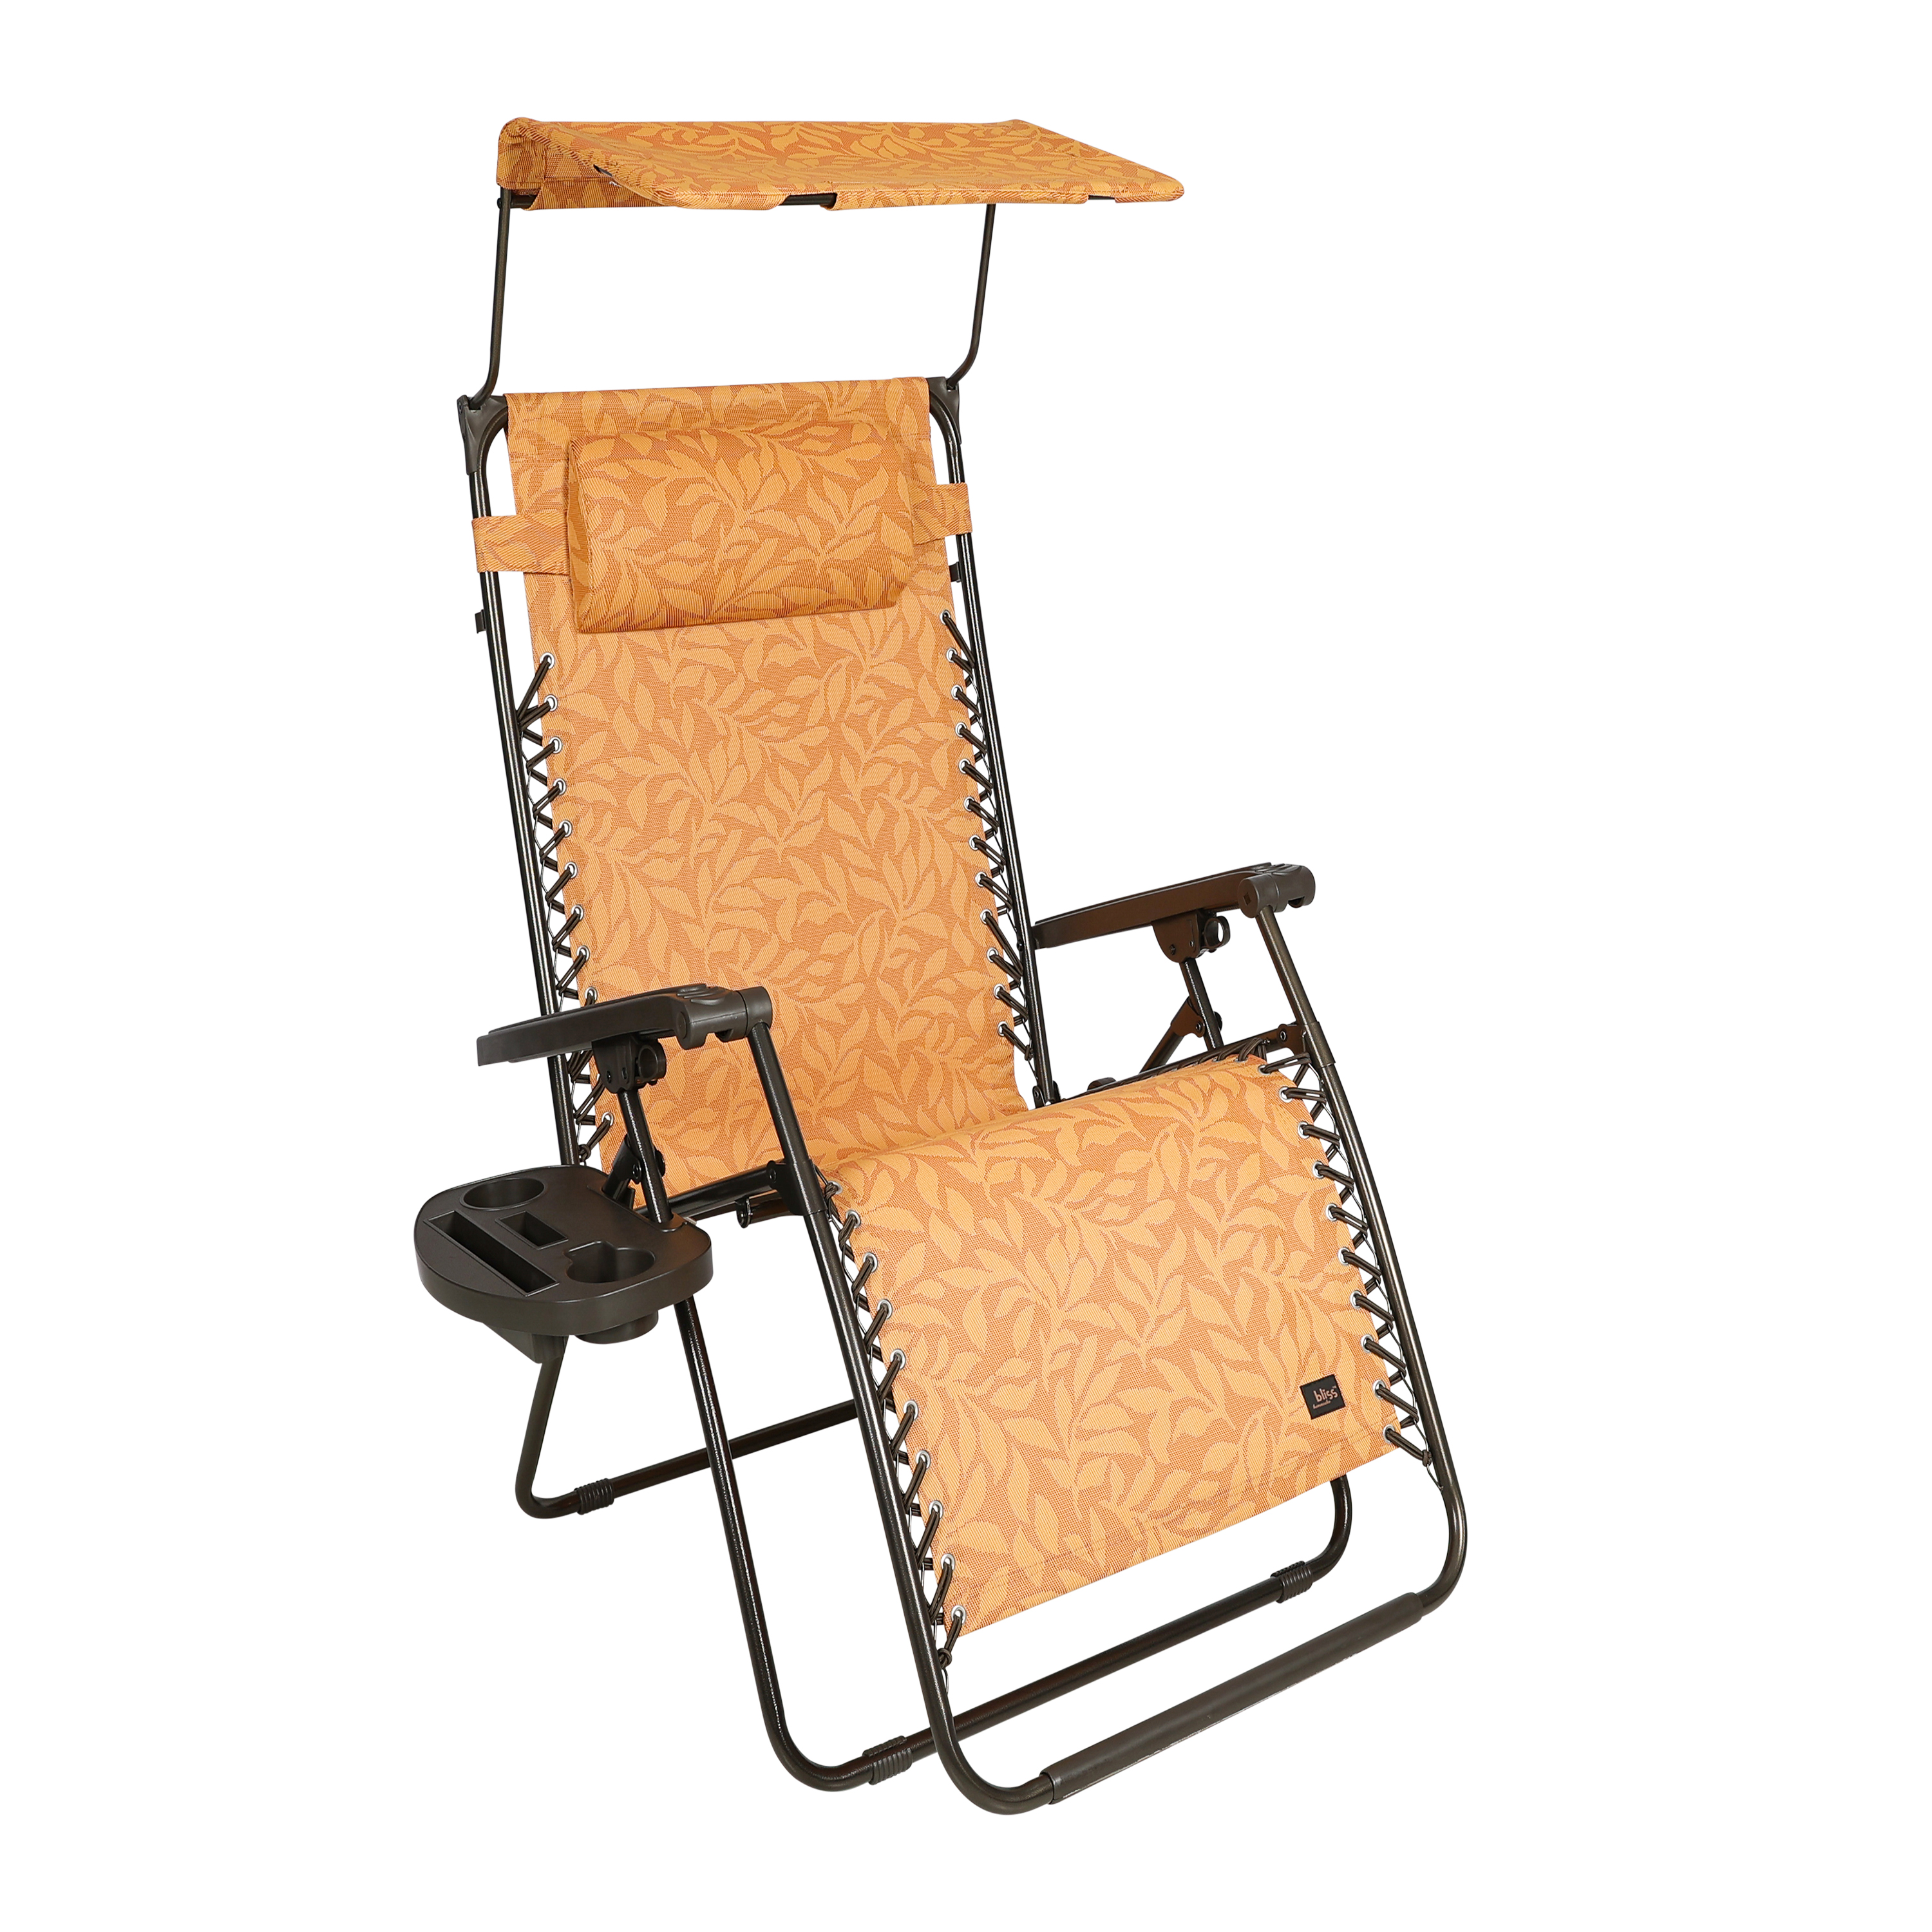 Bliss Hammocks 26" Wide Zero Gravity Chair w/ Adjustable Canopy Sun-Shade, Drink Tray, & Adjustable Pillow, 300 Lbs Capacity (Amber Leaf) - image 1 of 4